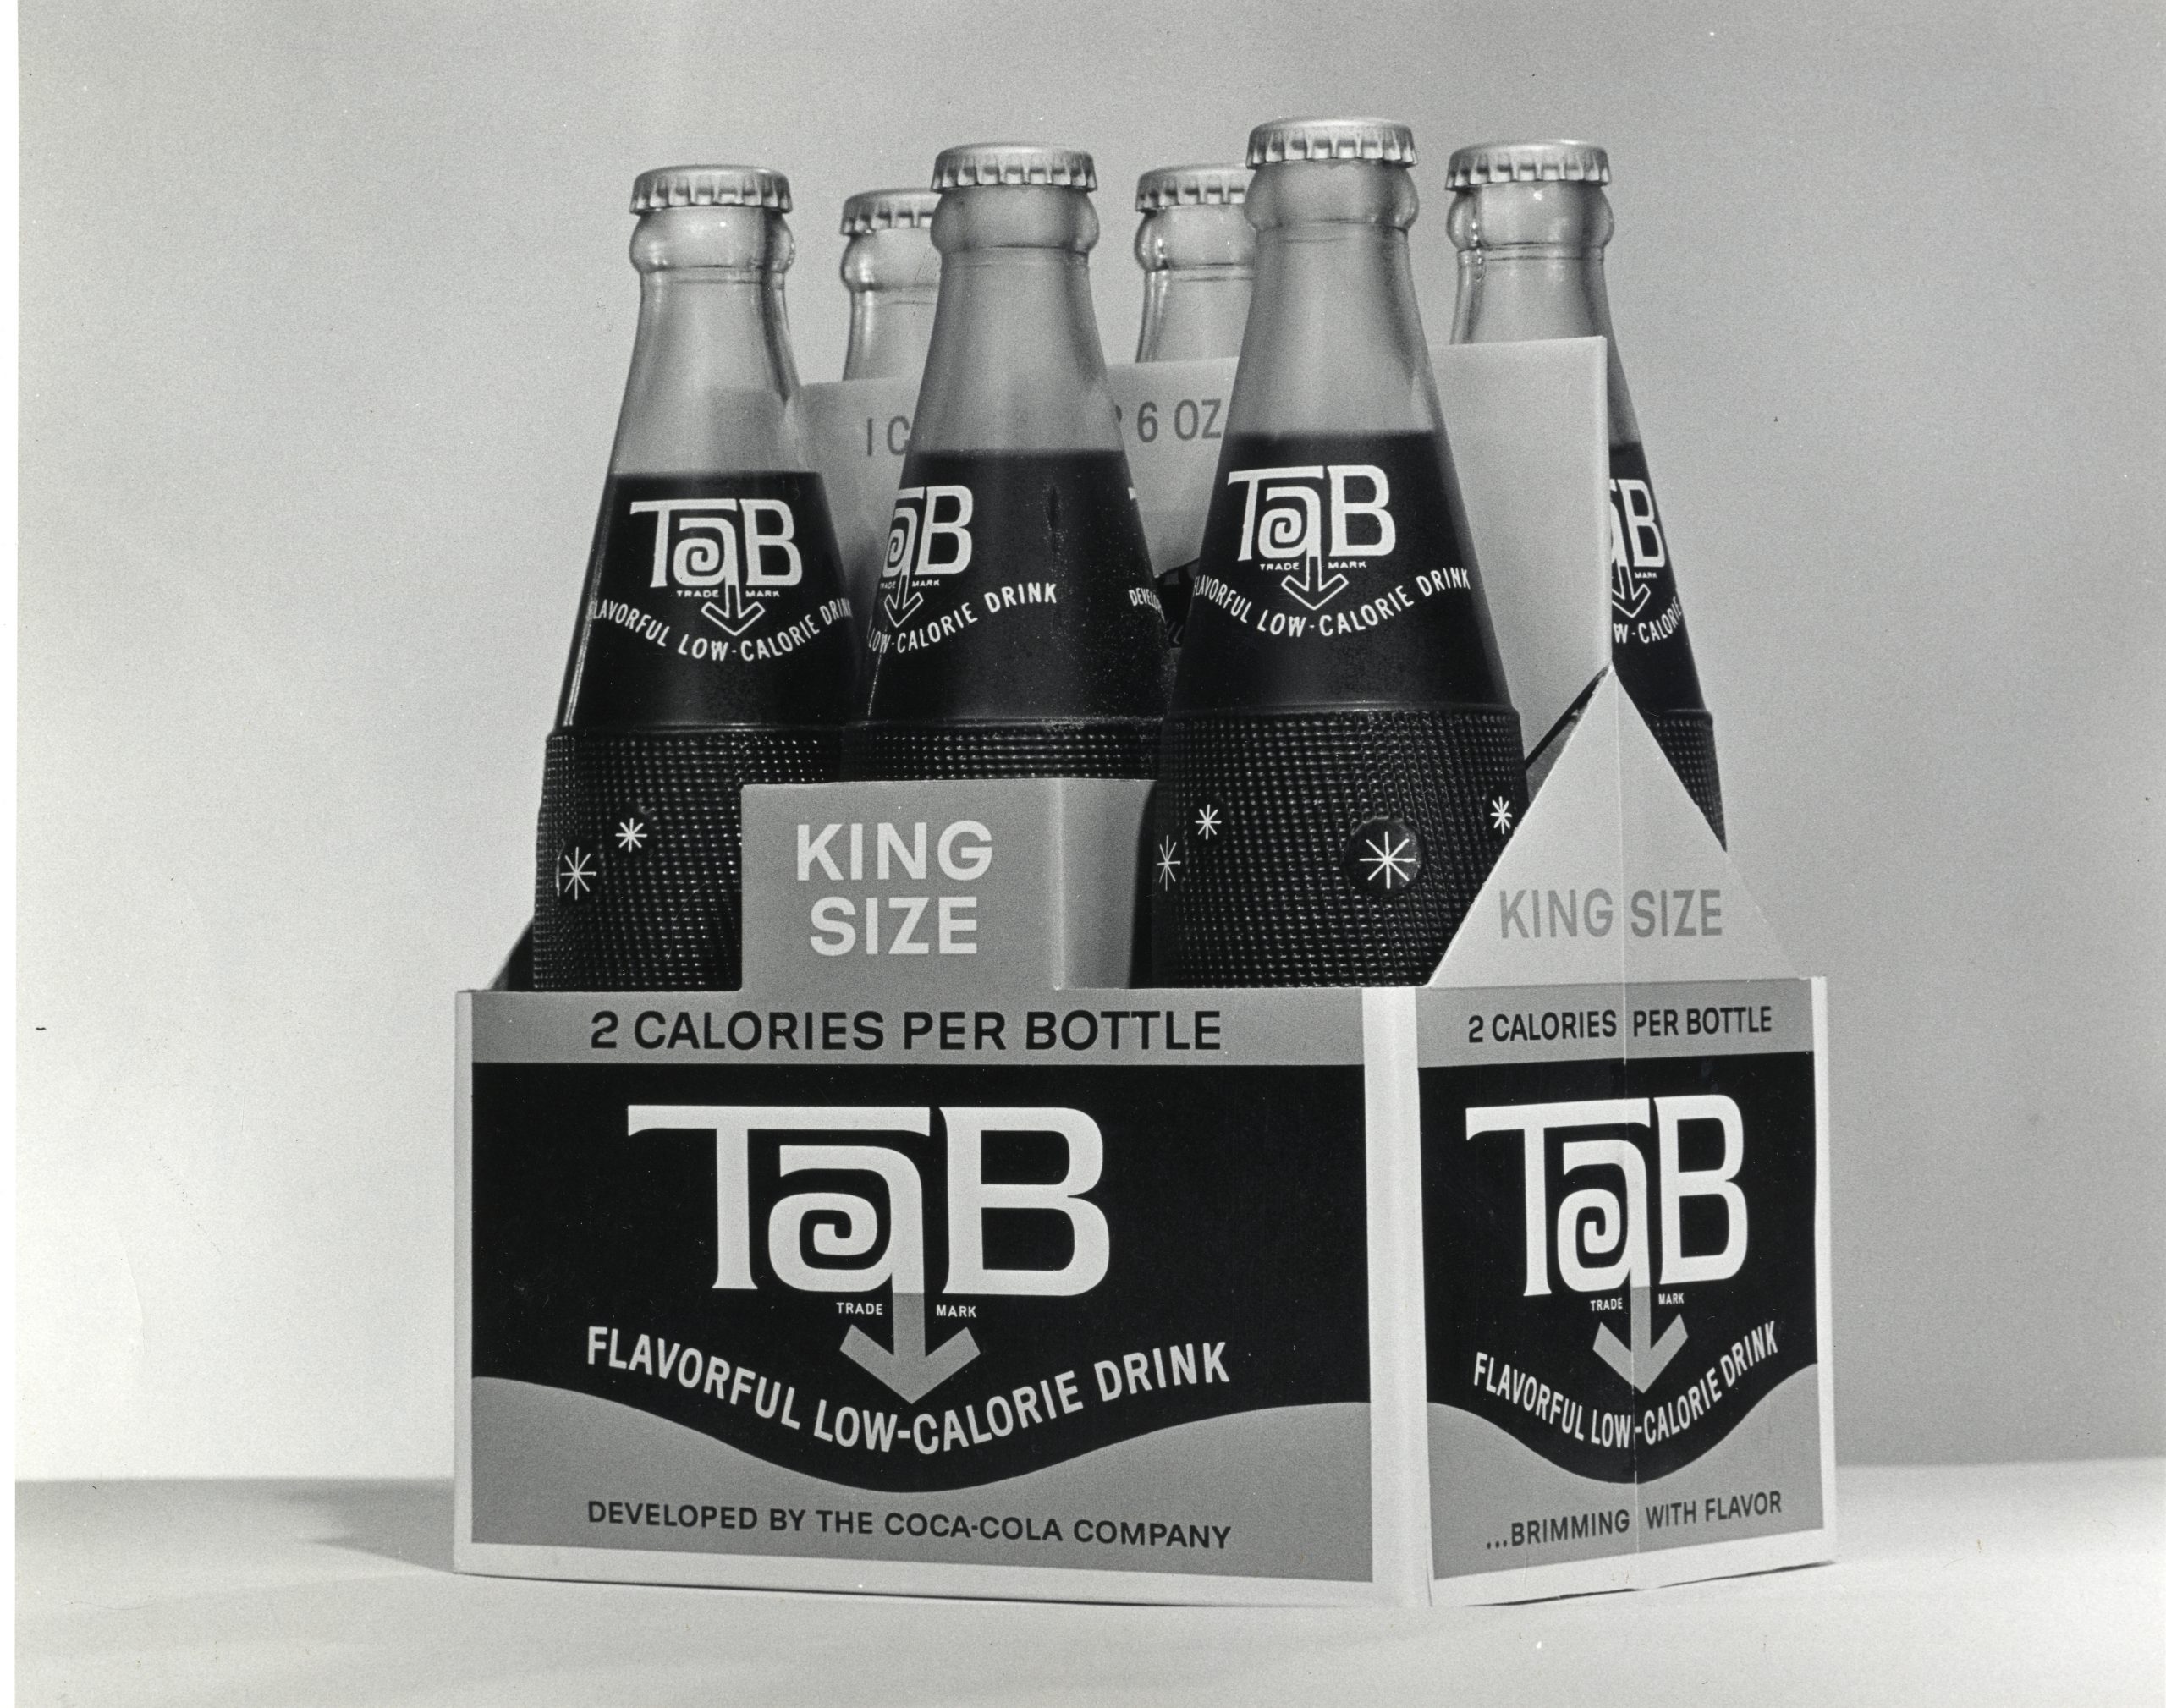 After 60 years, Coca-Cola announces the retirement of Tab, its iconic diet drink